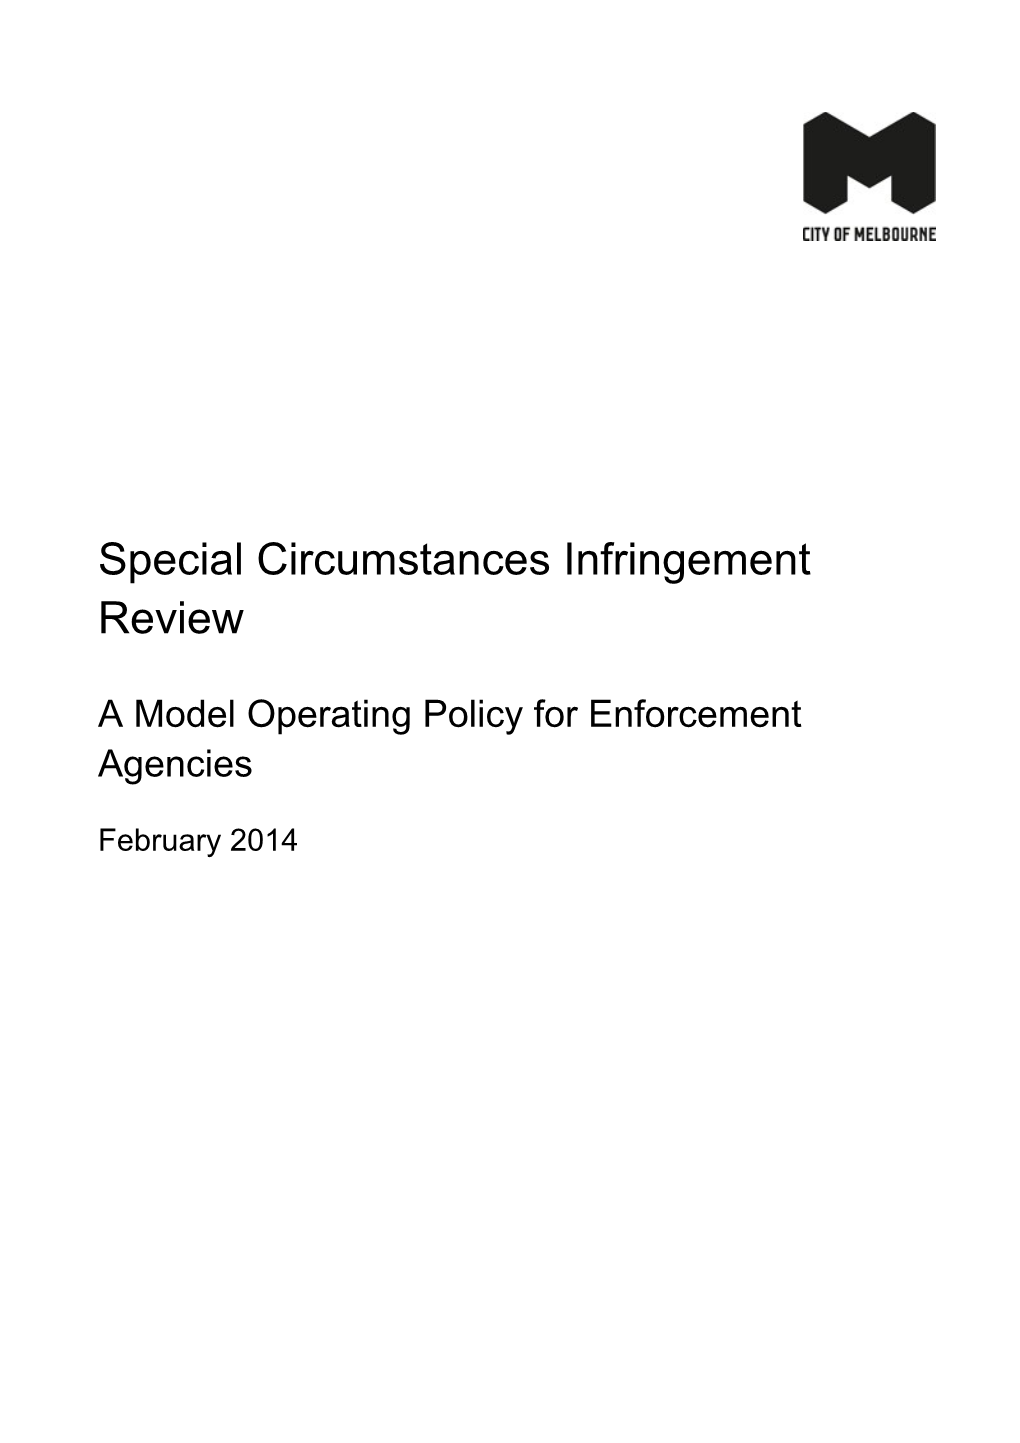 Special Circumstances Infringement Review: Model Operating Policy